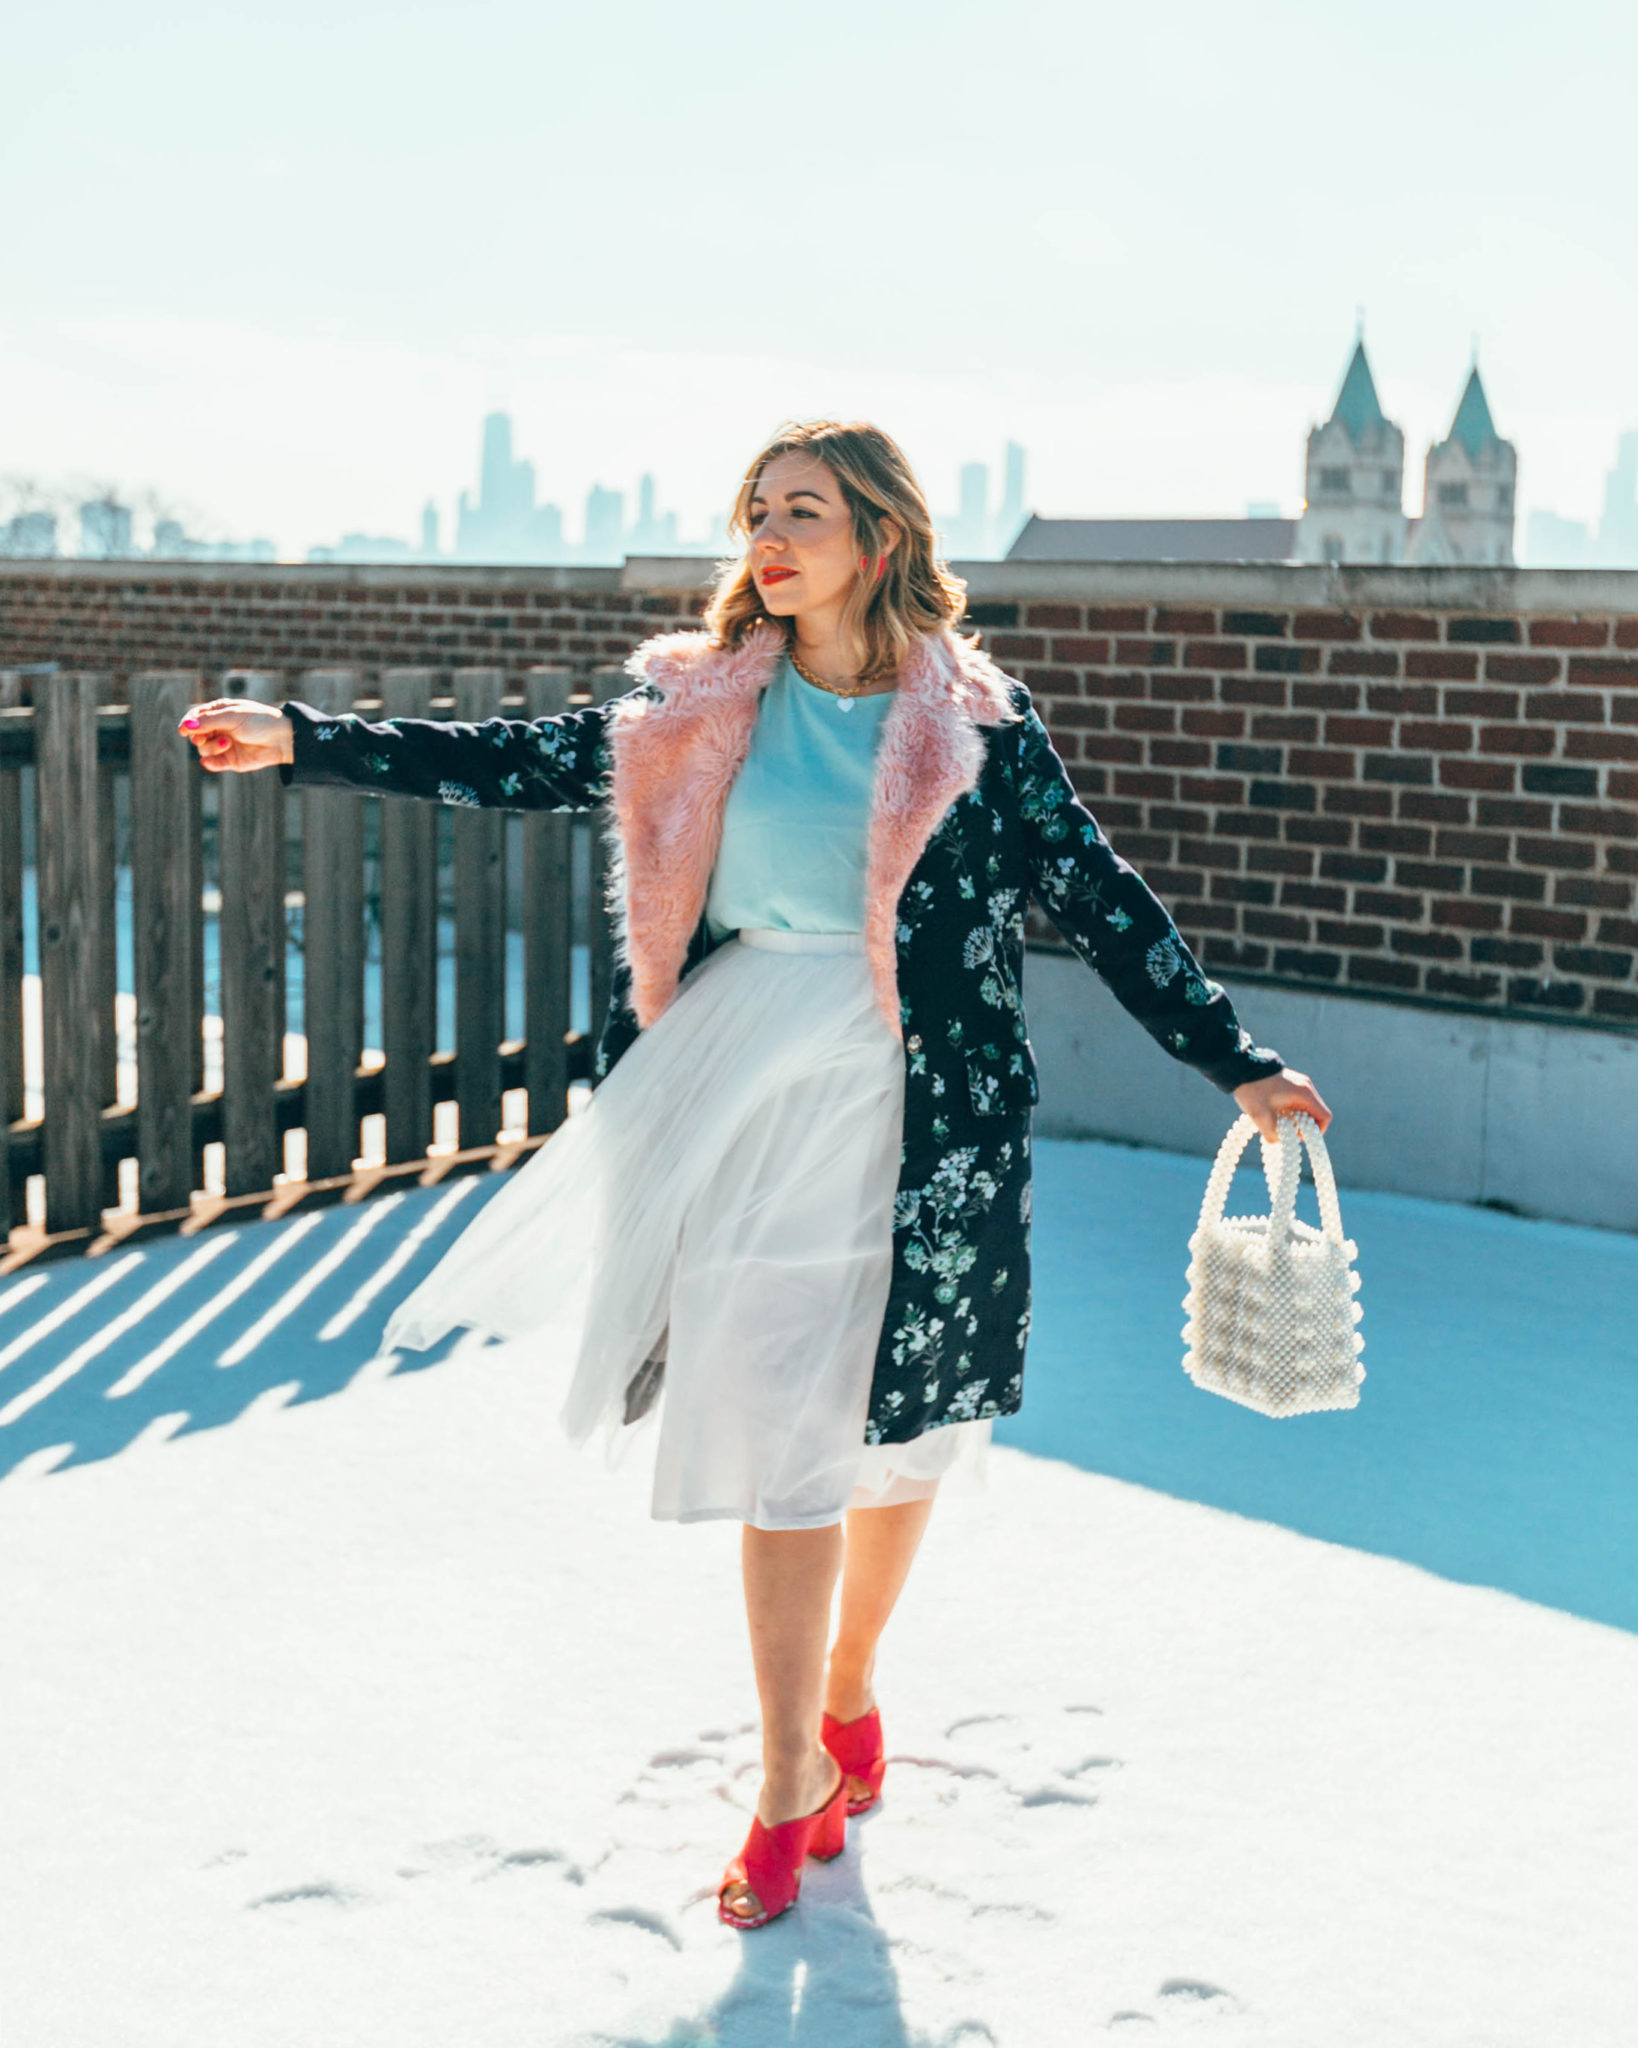 White tulle skirt styled by top US fashion blog, Glass of Glam: image of a woman wearing an ASOS white tulle skirt, SheIn Aqua top, Amazon pink sandals, Rent the Runway floral coat, BaubleBar heart pendant necklace, Baublebar heat earrings and an Amazon beaded handbag